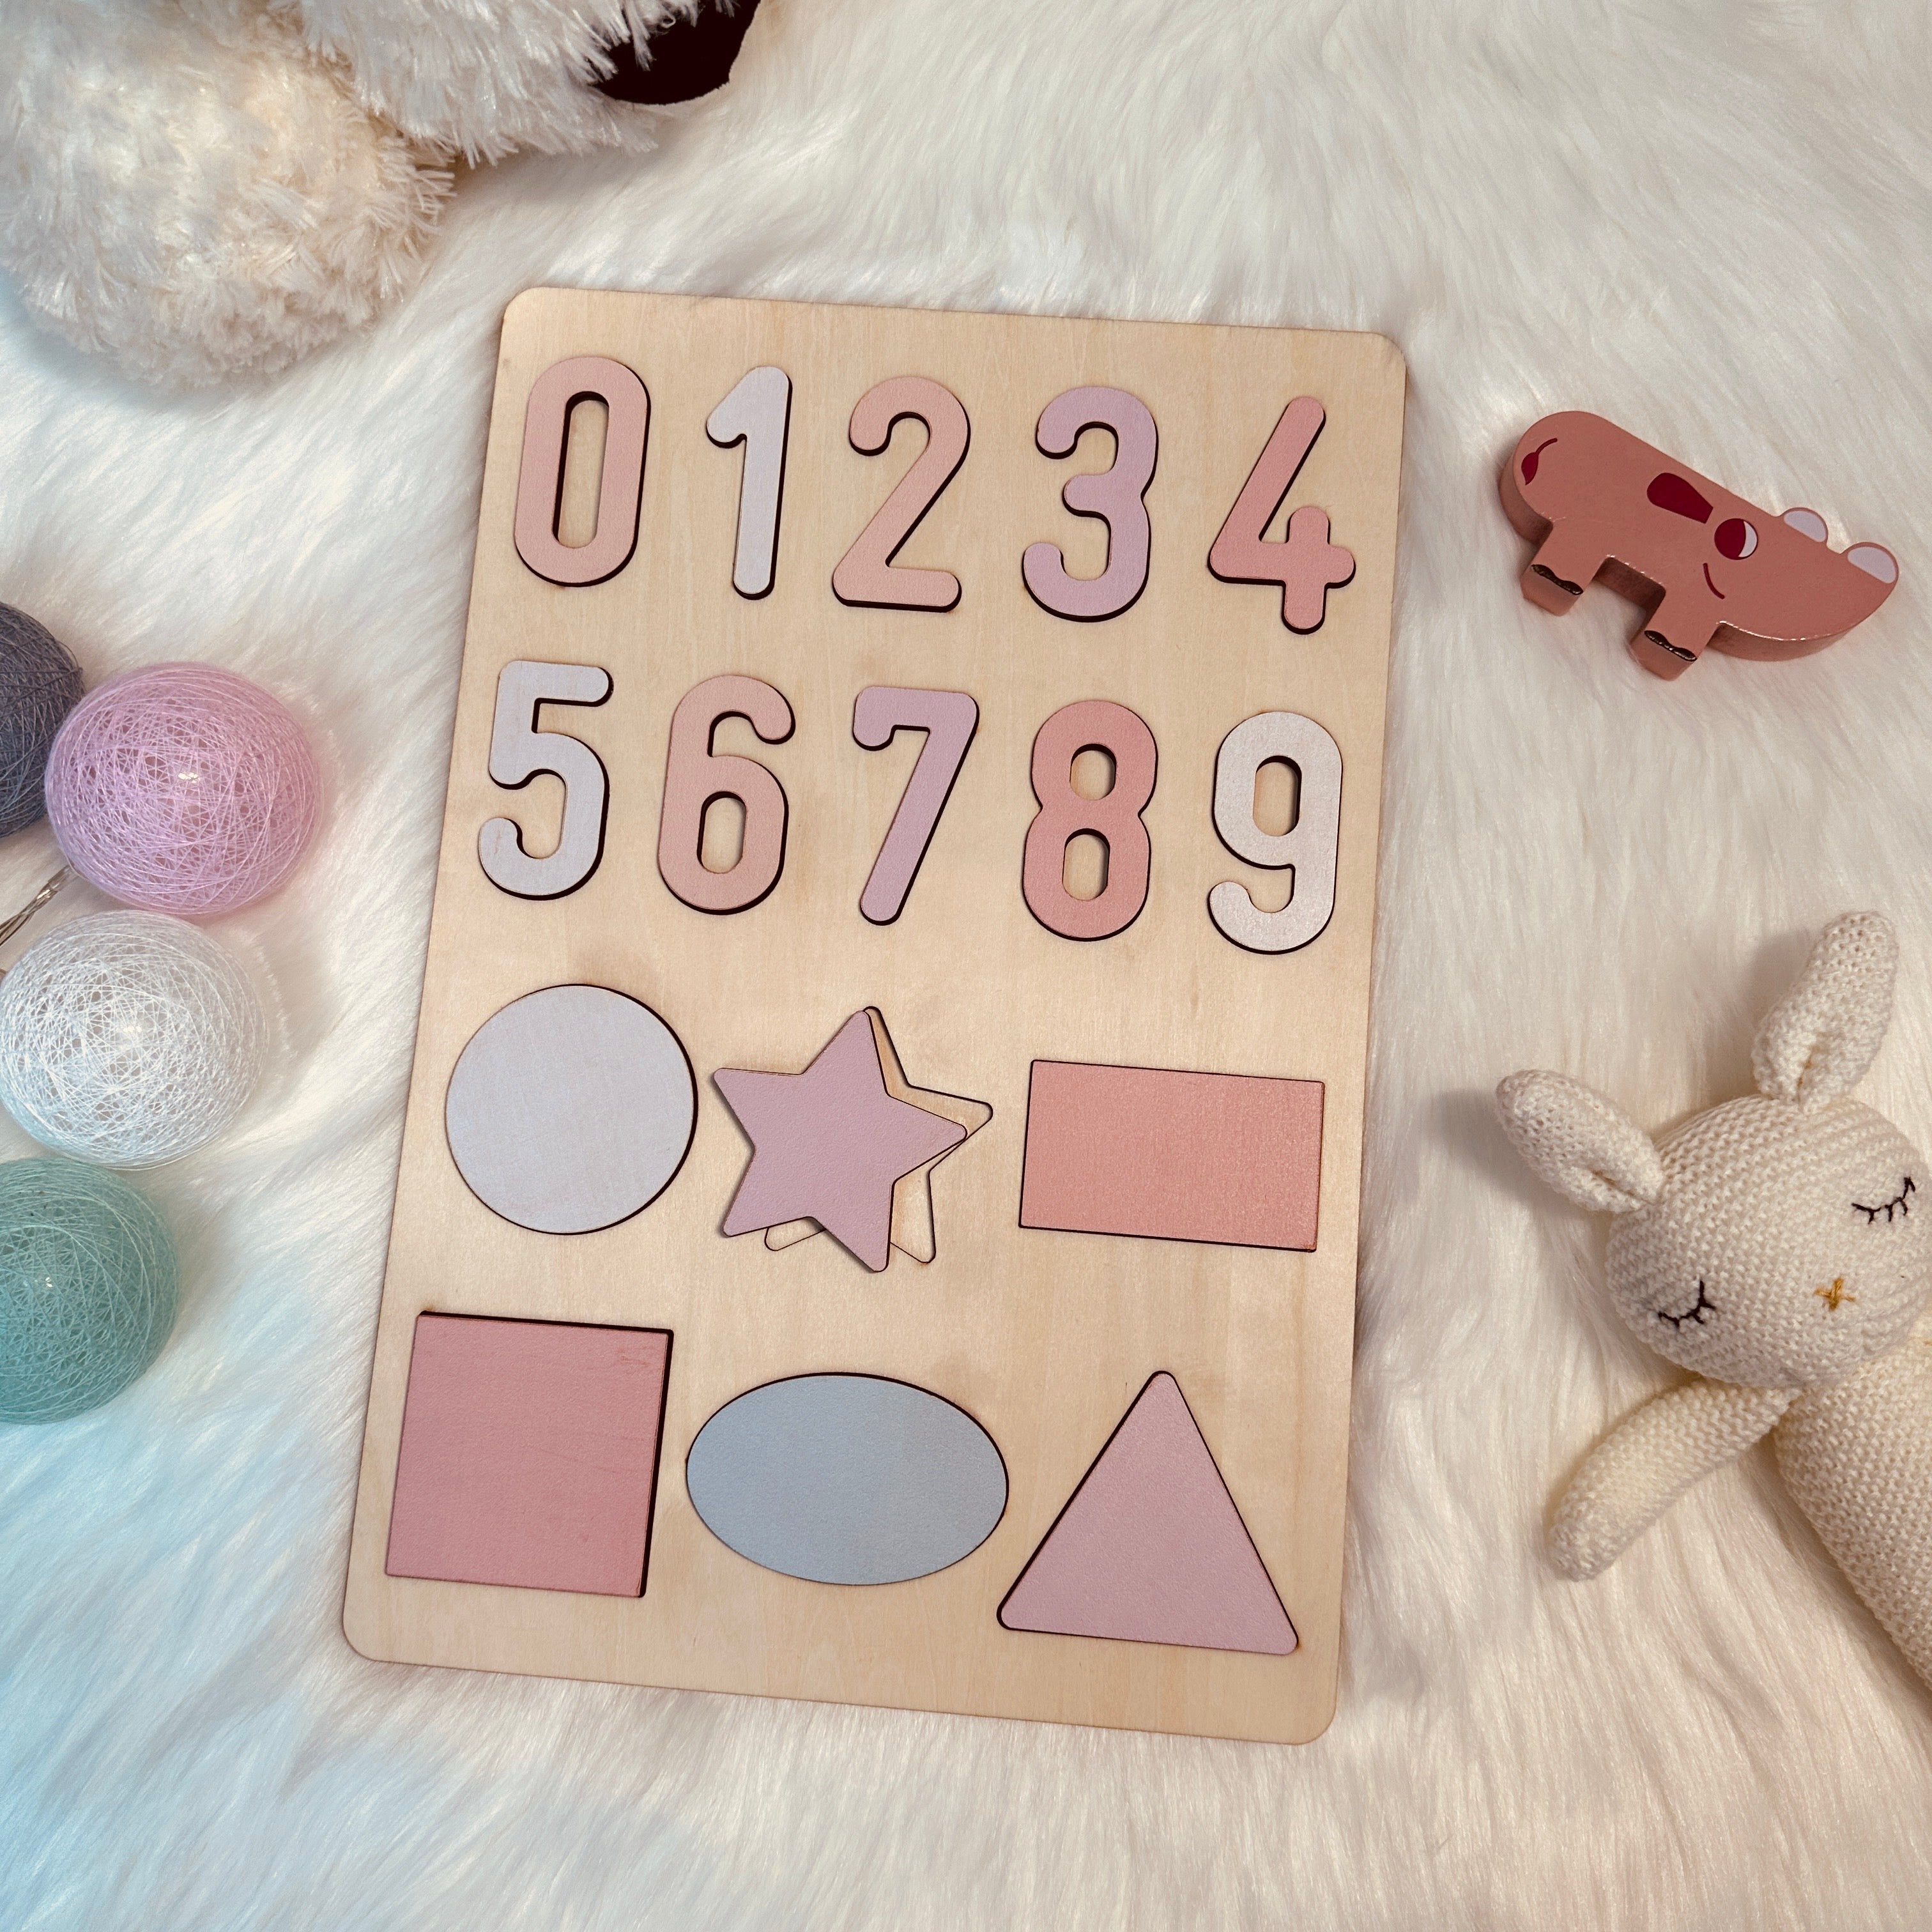 Shapes And Numbers Wooden Educational Puzzle